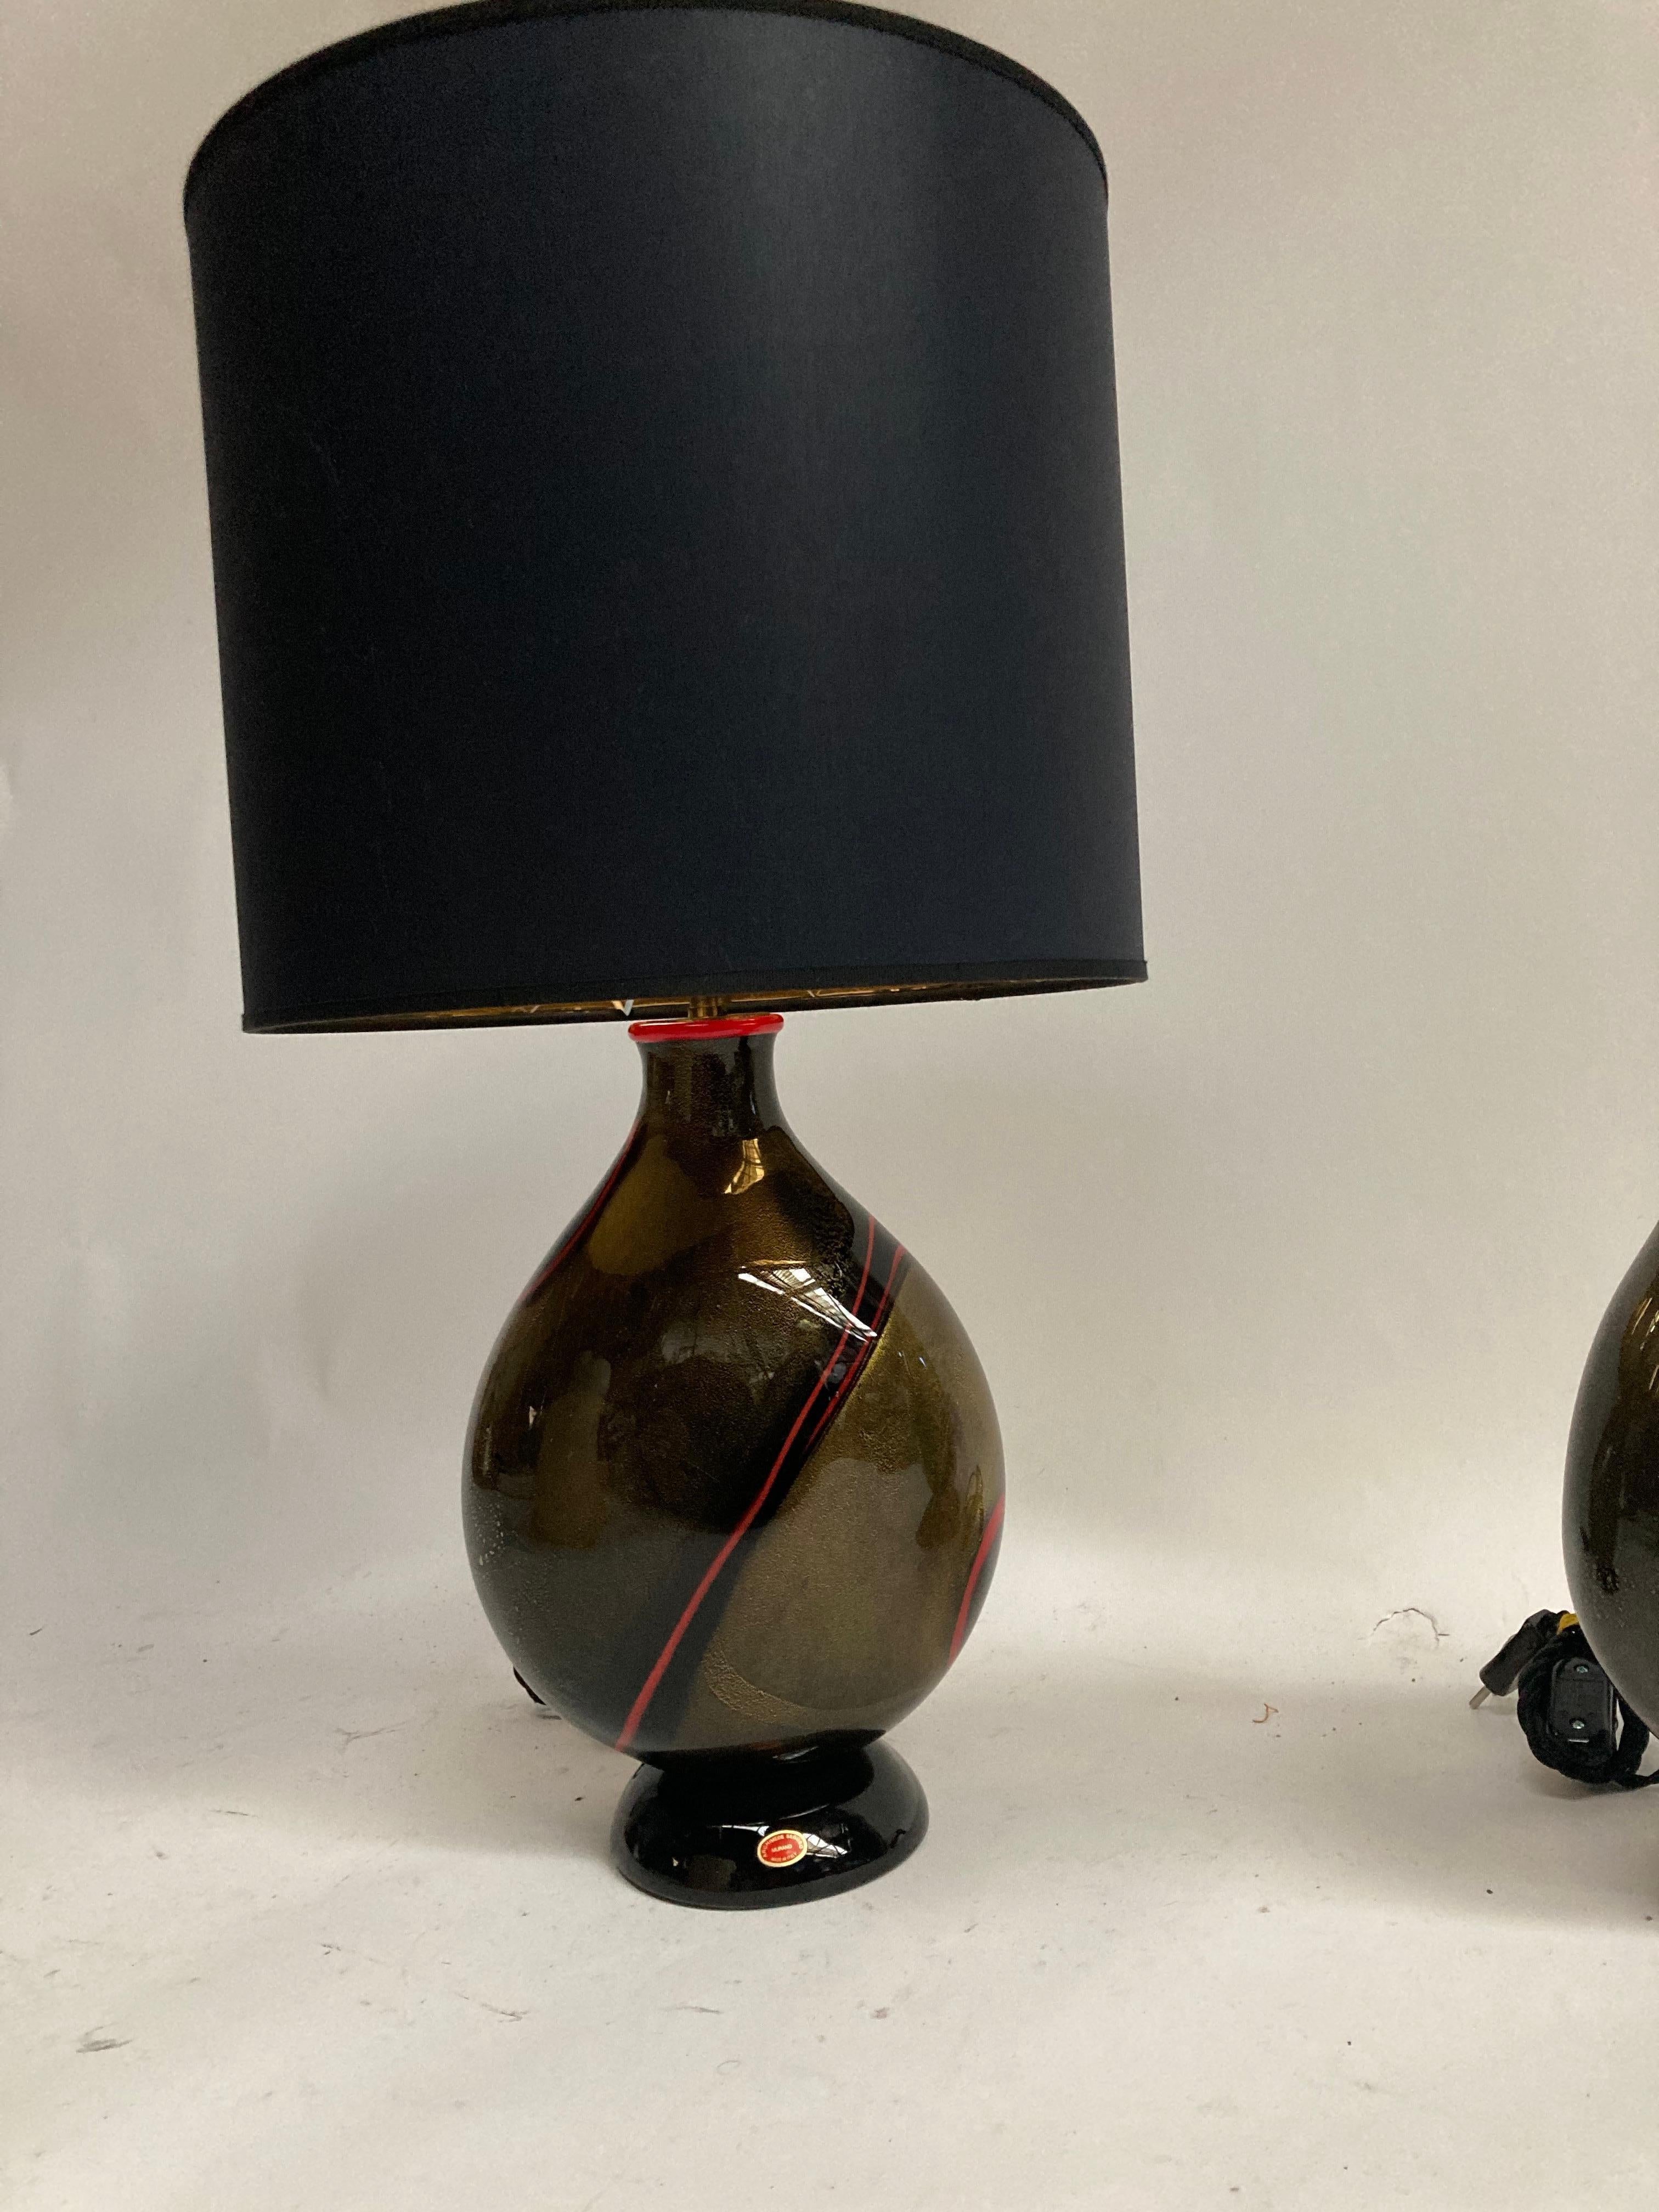 1970's Pair of Murano glass lamps by Archimede Seguso
Italy.